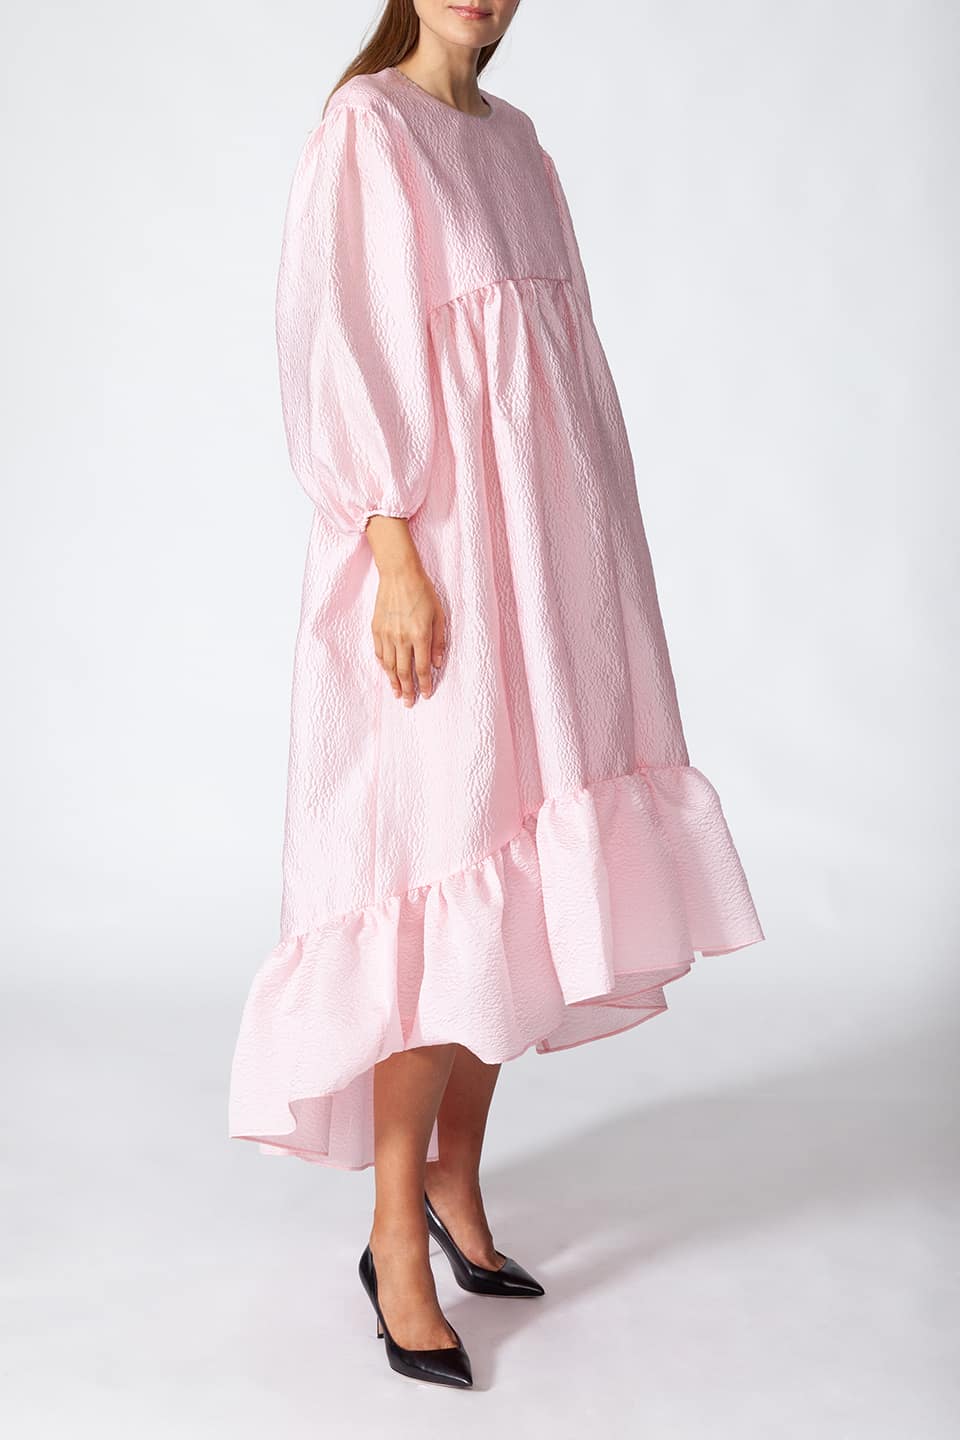 Thumbnail for Product gallery 4, Model in pose for side view wearing Manoush sylist pink long dress with puffy sleeves. Scalloped neck with contrasting stitching.